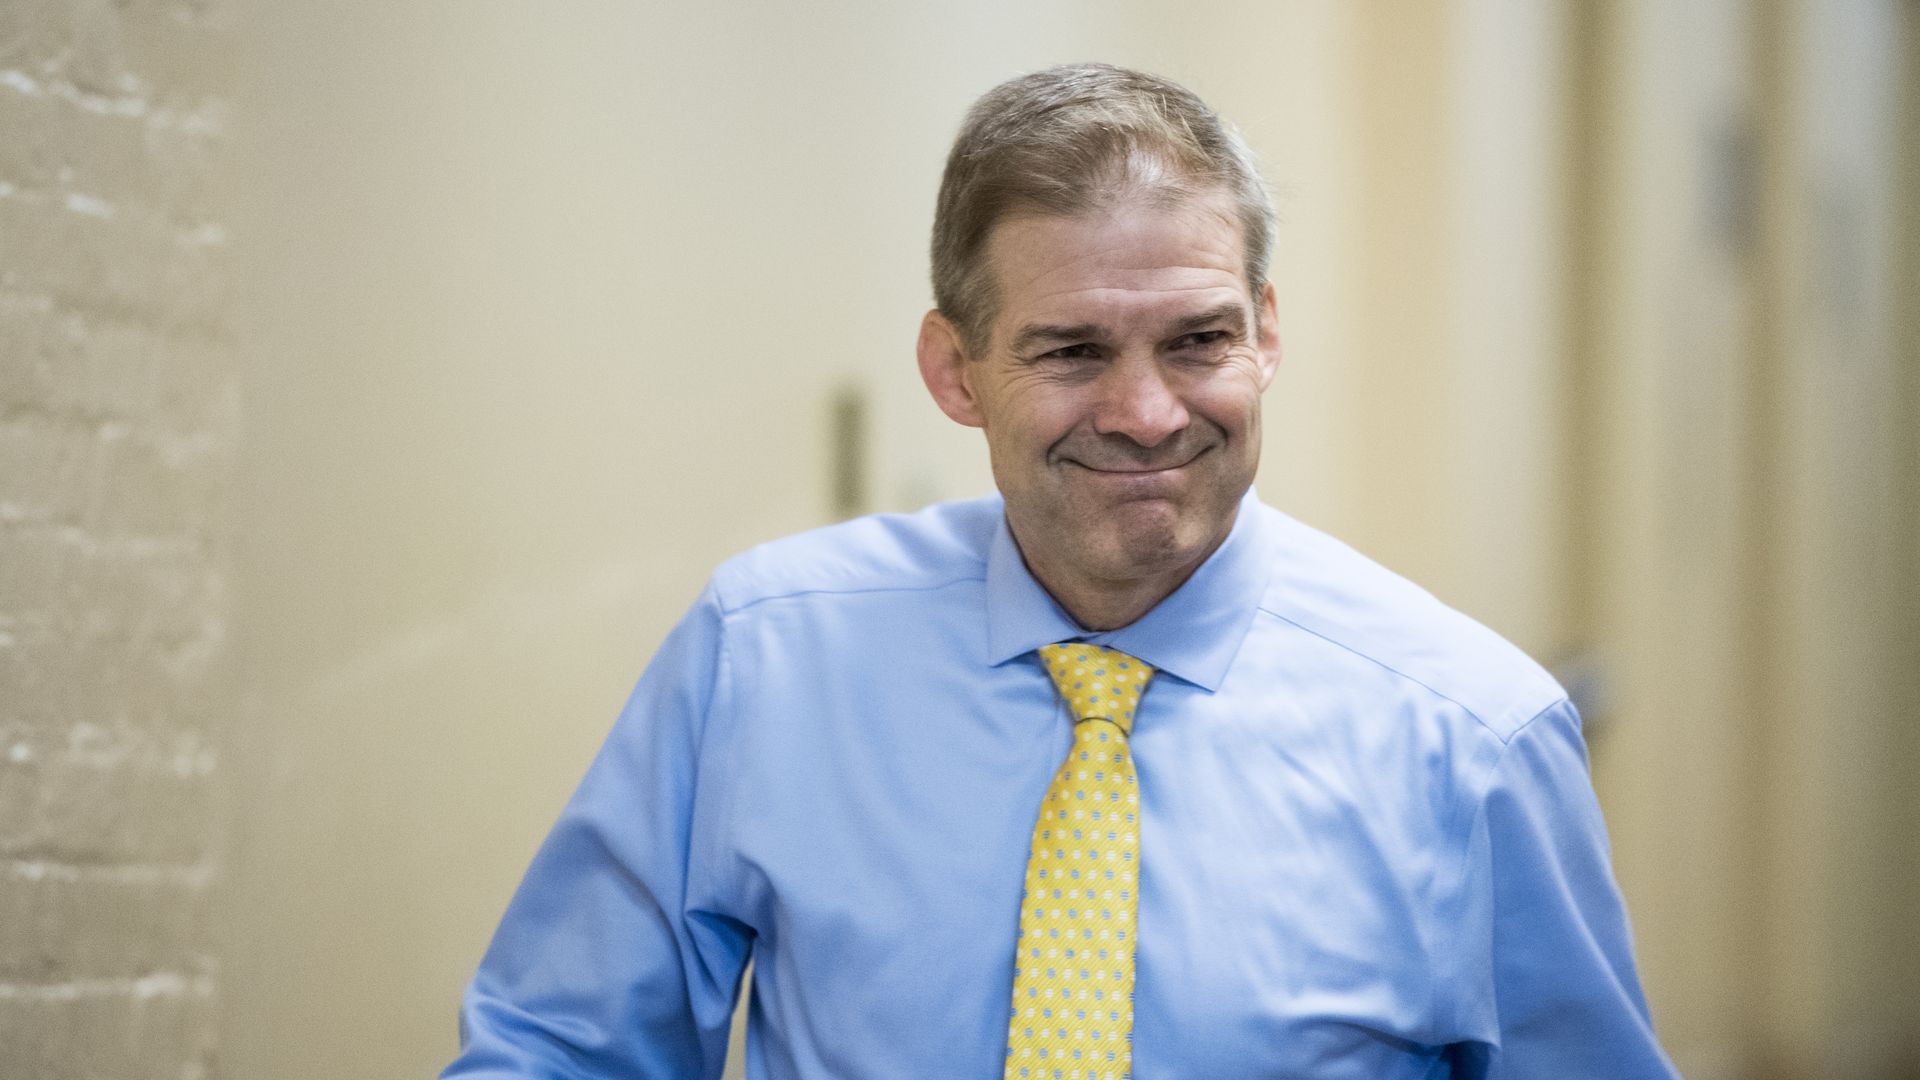 Rep. Jim Jordan in a blue shirt and yellow tie smiles in a strained way while walking.